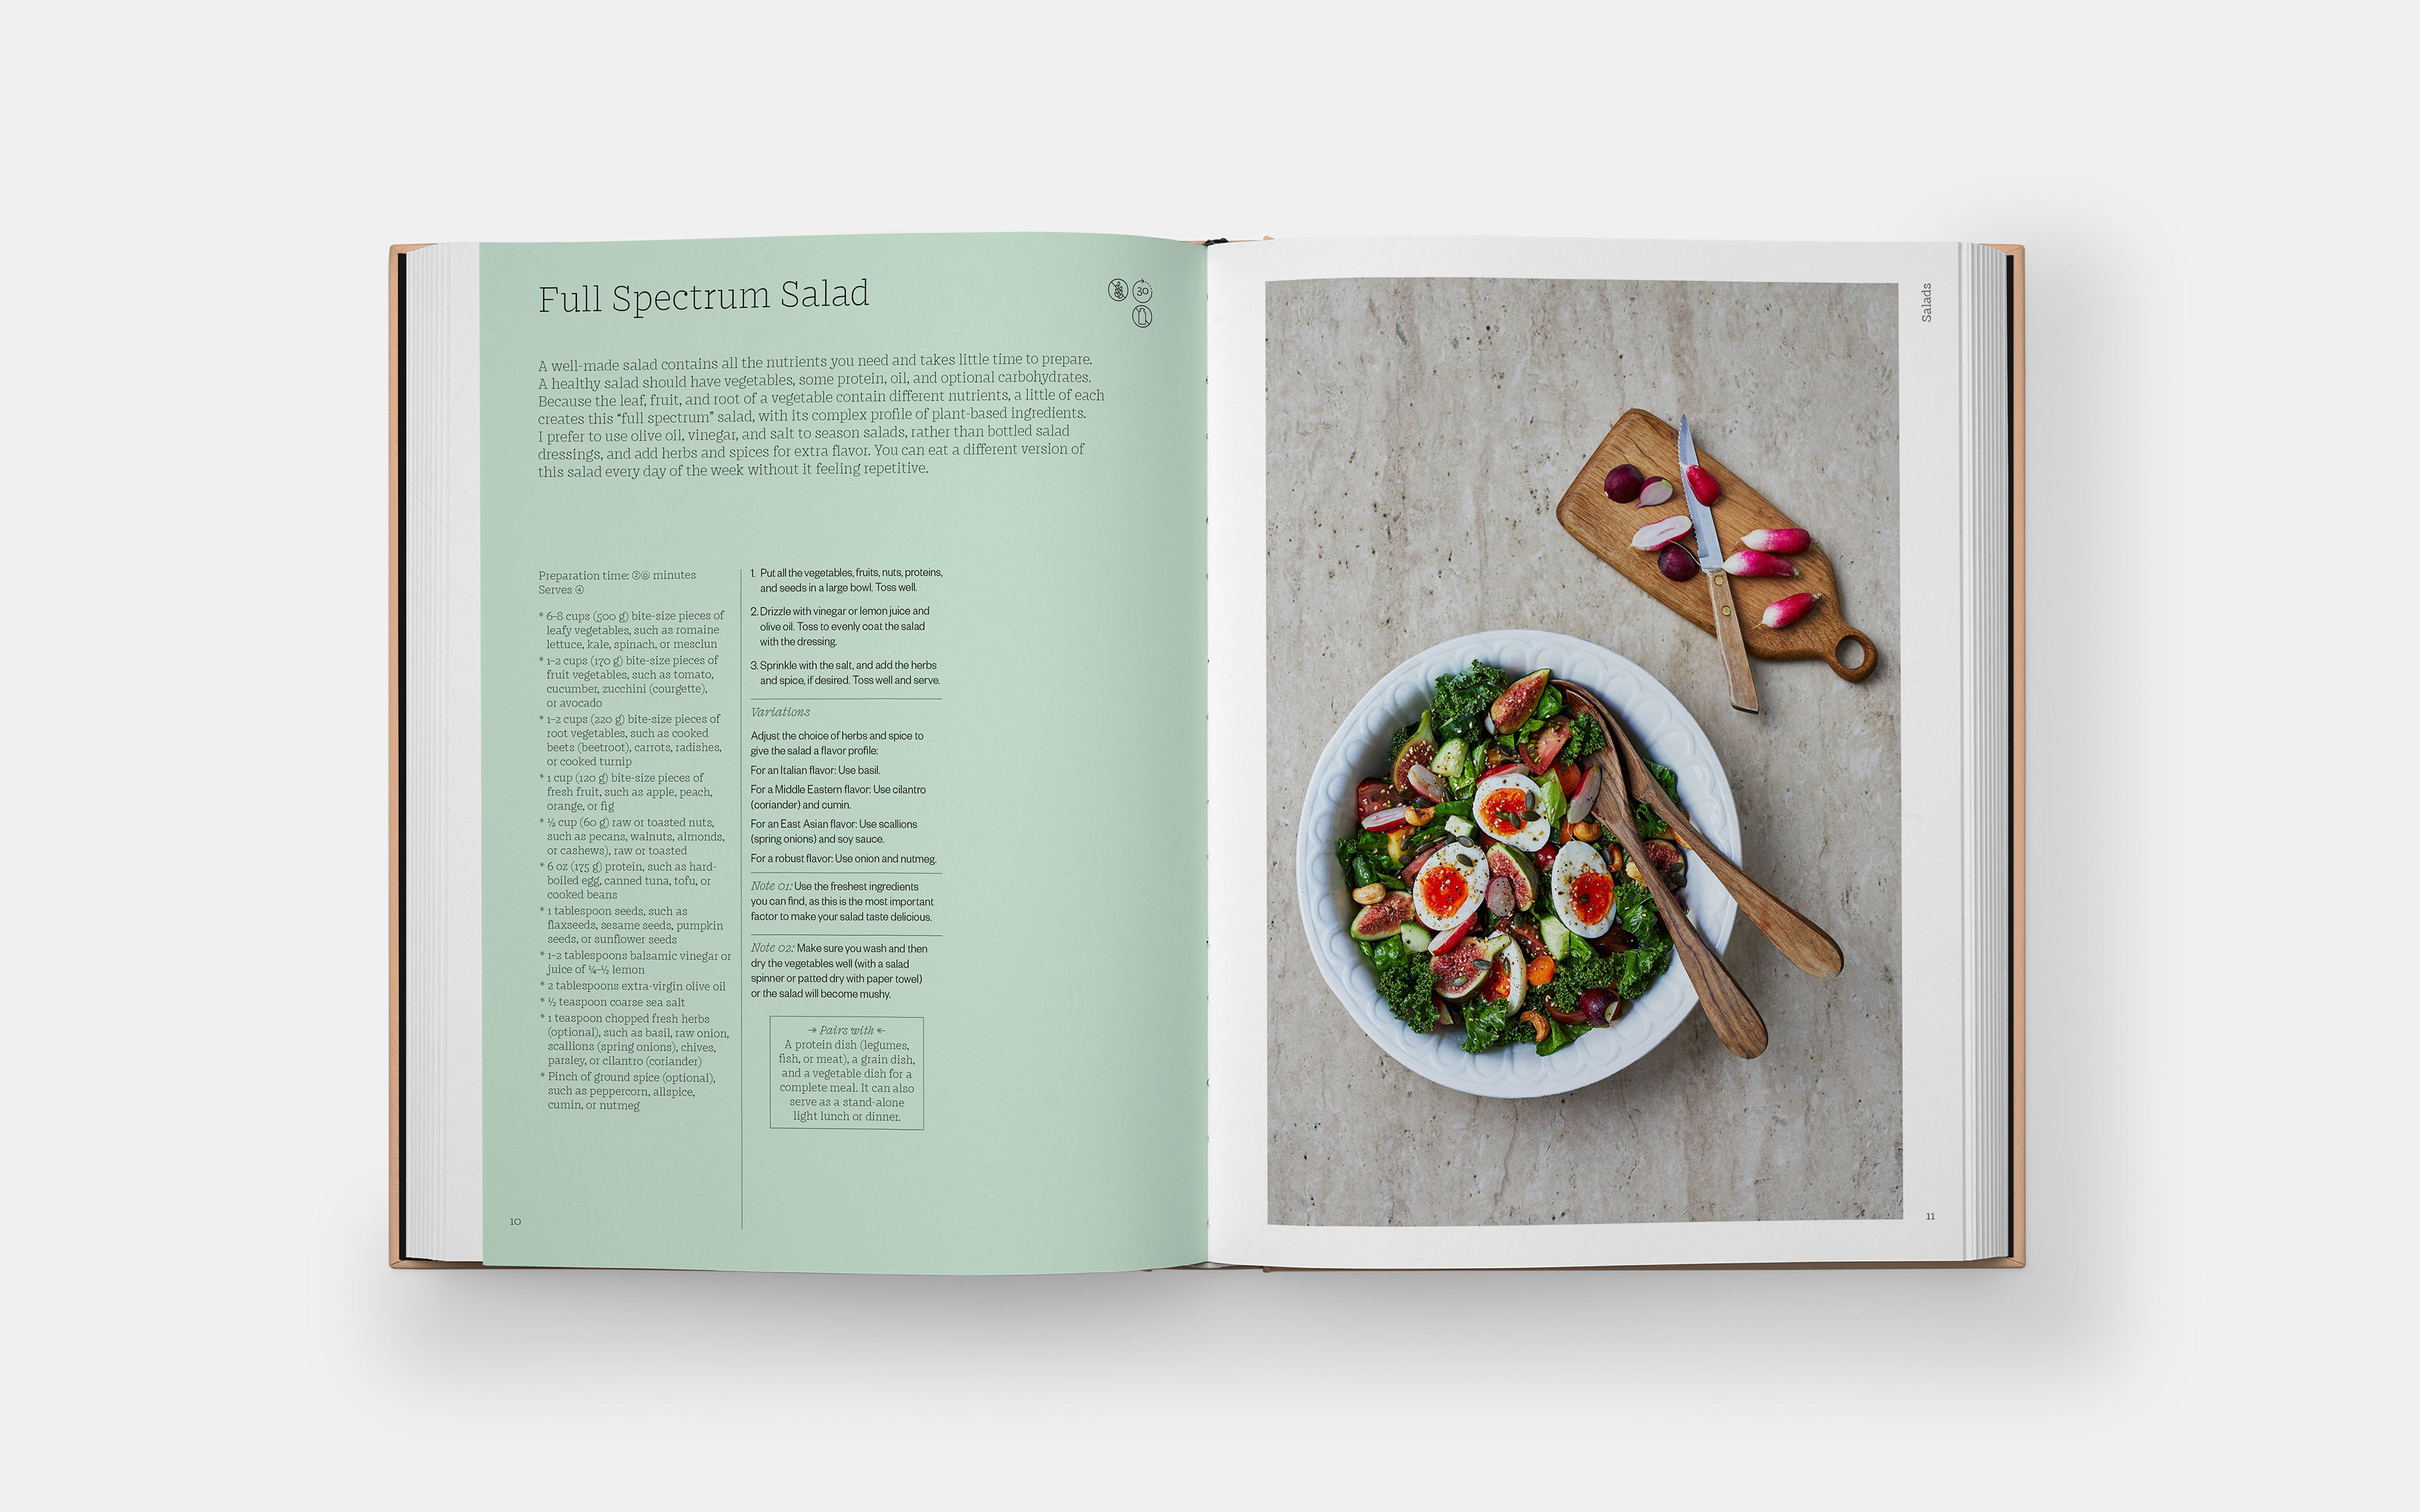 Pages from The Wellness Principles featuring Dr Gary Deng's Full Spectrum Salad